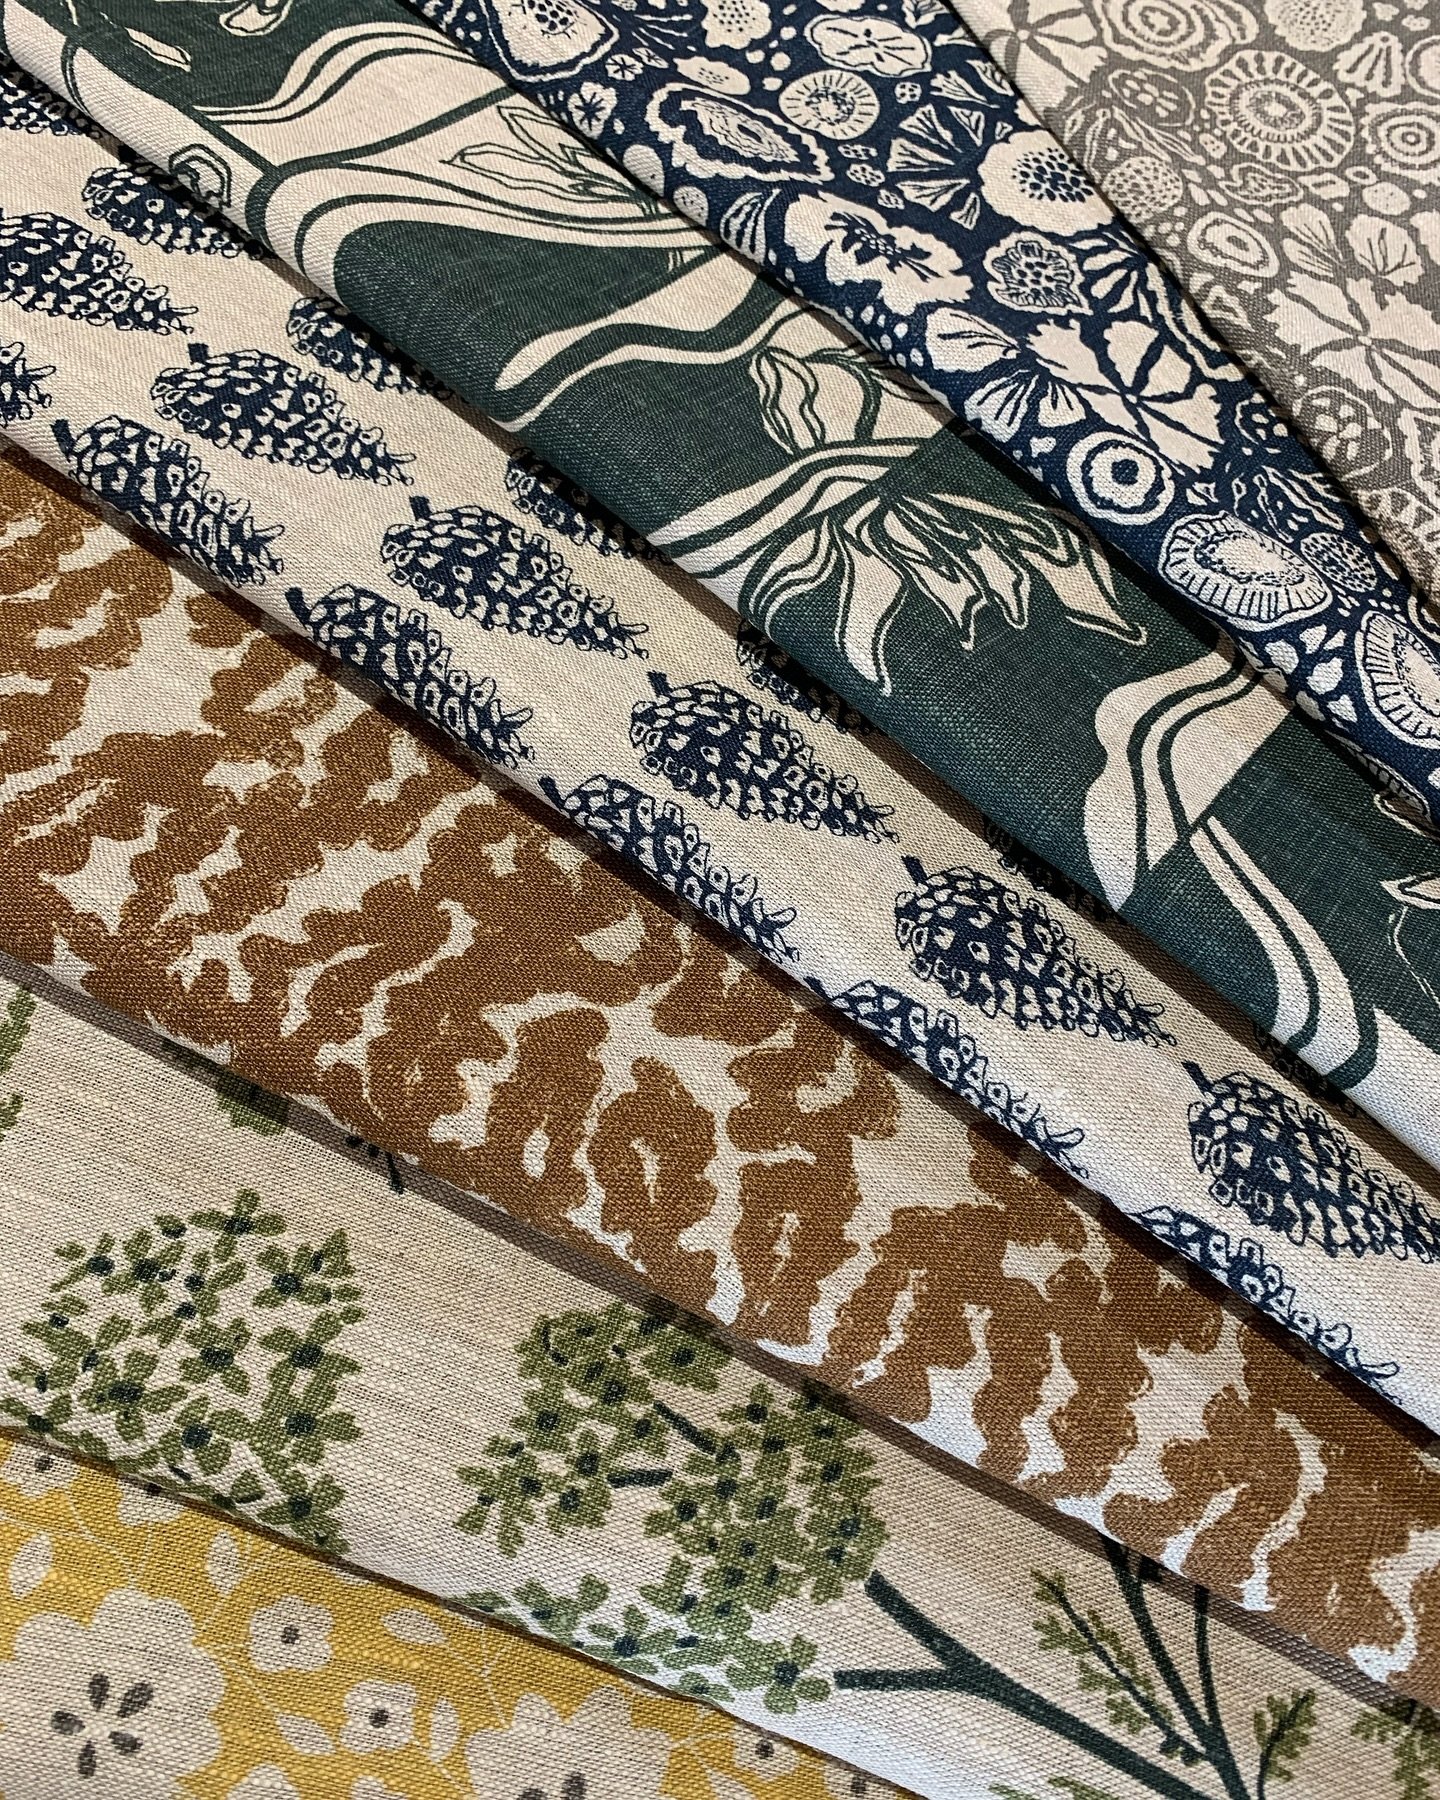 A fan of fabulous fabrics! 

Hand printed and heat set ready to send out to our customers! 

Spot our olives room, achillea, pine cones, lichen and new collections: forest floor and the Cliffe and Criddle designs too! 

Which is your favourite?! 💚

